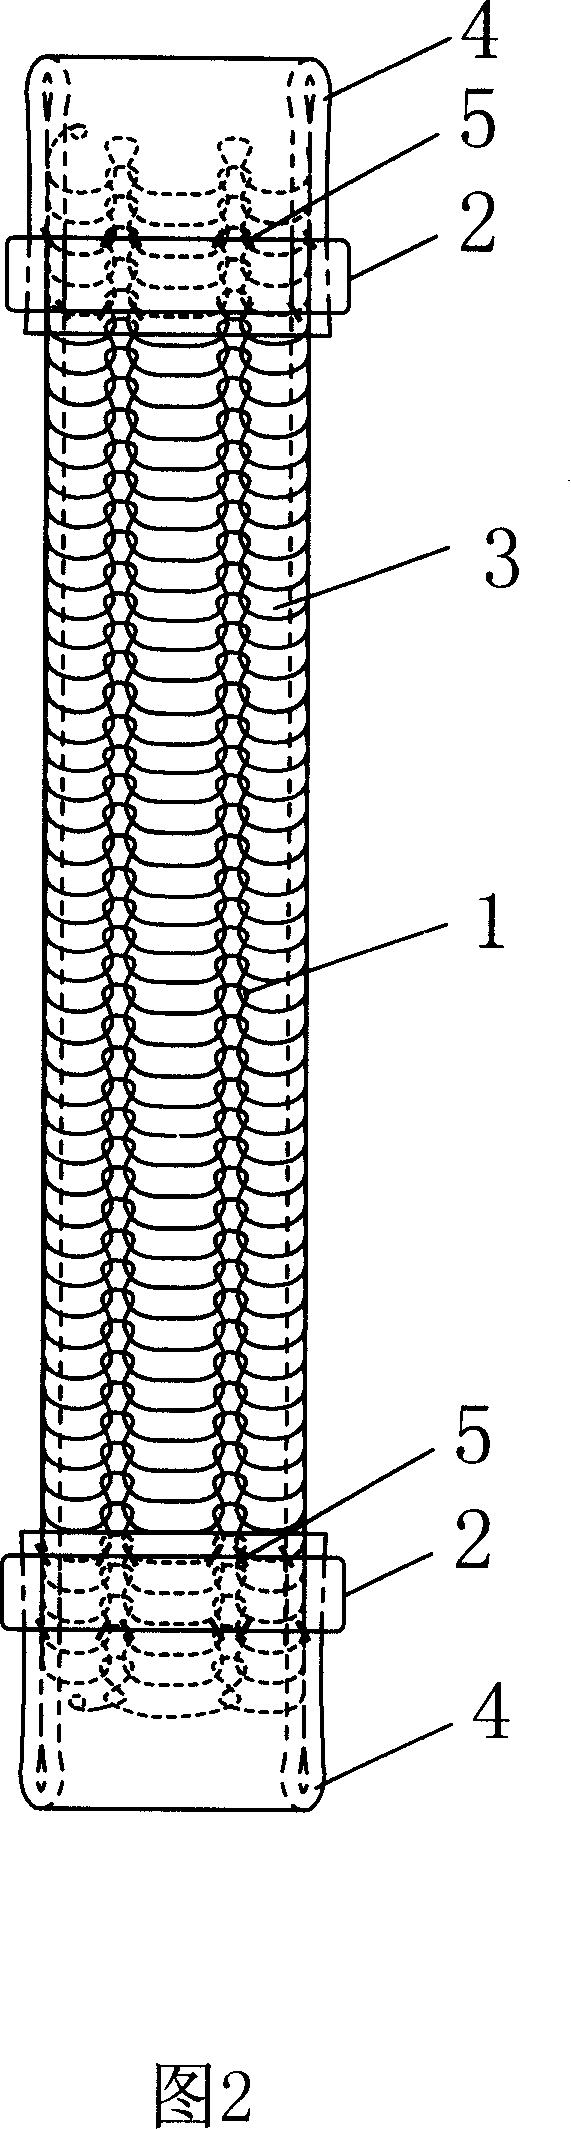 Artificial human body intracavity duct with buffer edge